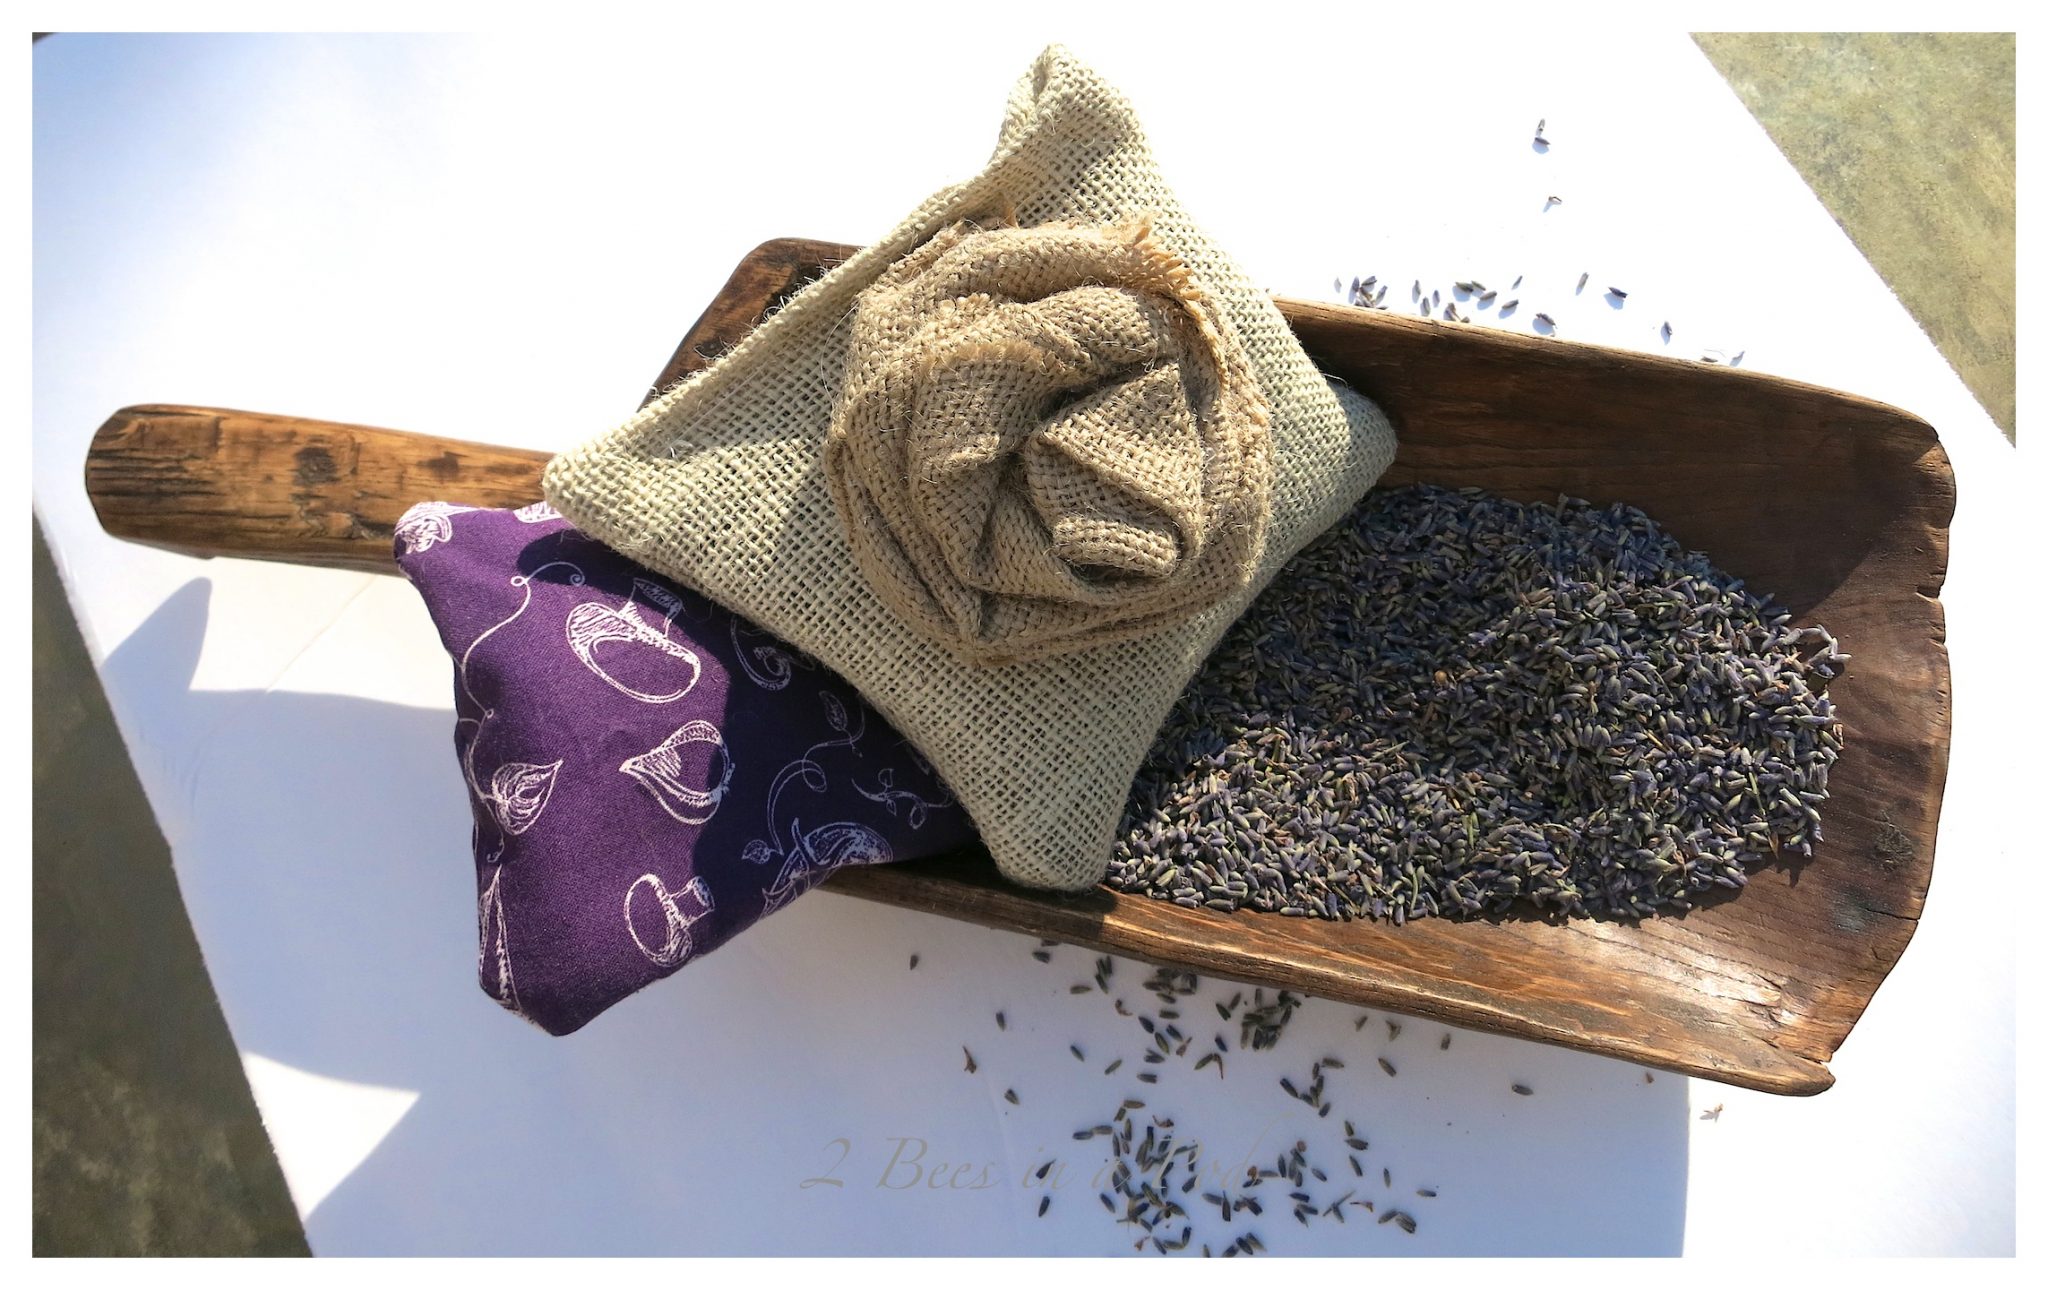 DIY Lavender Sachets - easy sew project. Use burlap fabric or cloth of your choose. Sew on three sides and then fill with lavender. Sew fourth side together. I decorate with a burlap rose. Sachet is great for drawers, on a side table in a bowl or microwave to remove funky odors.